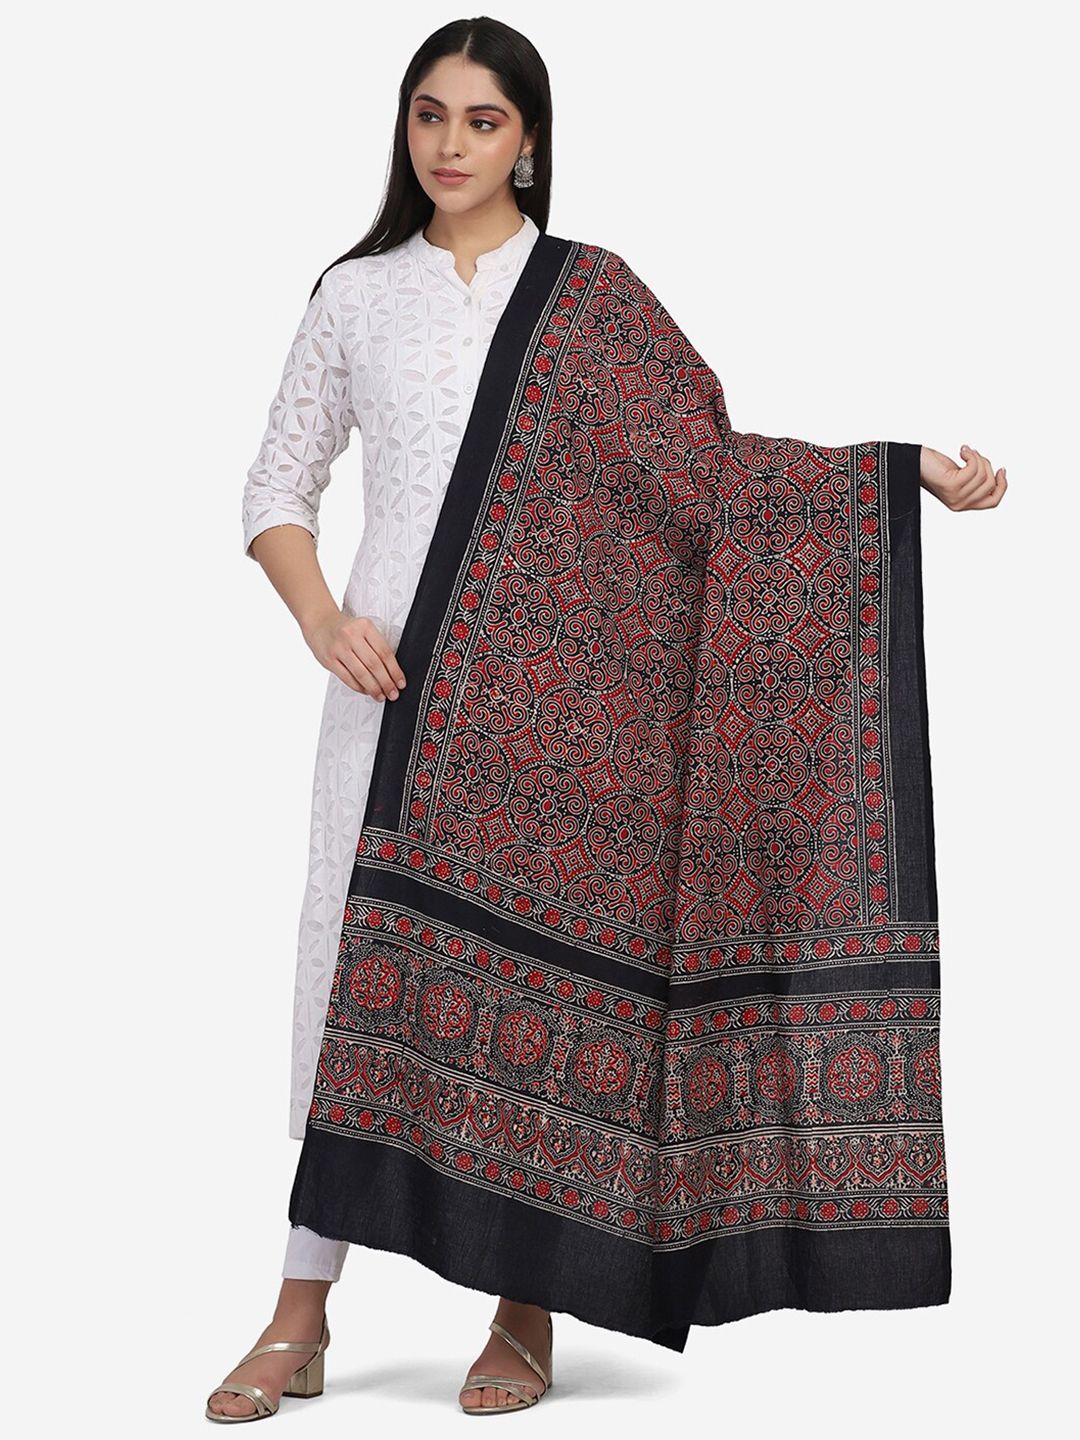 THE WEAVE TRAVELLER Black & Maroon Ajrakh Hand Block Printed Pure Cotton Dupatta Price in India